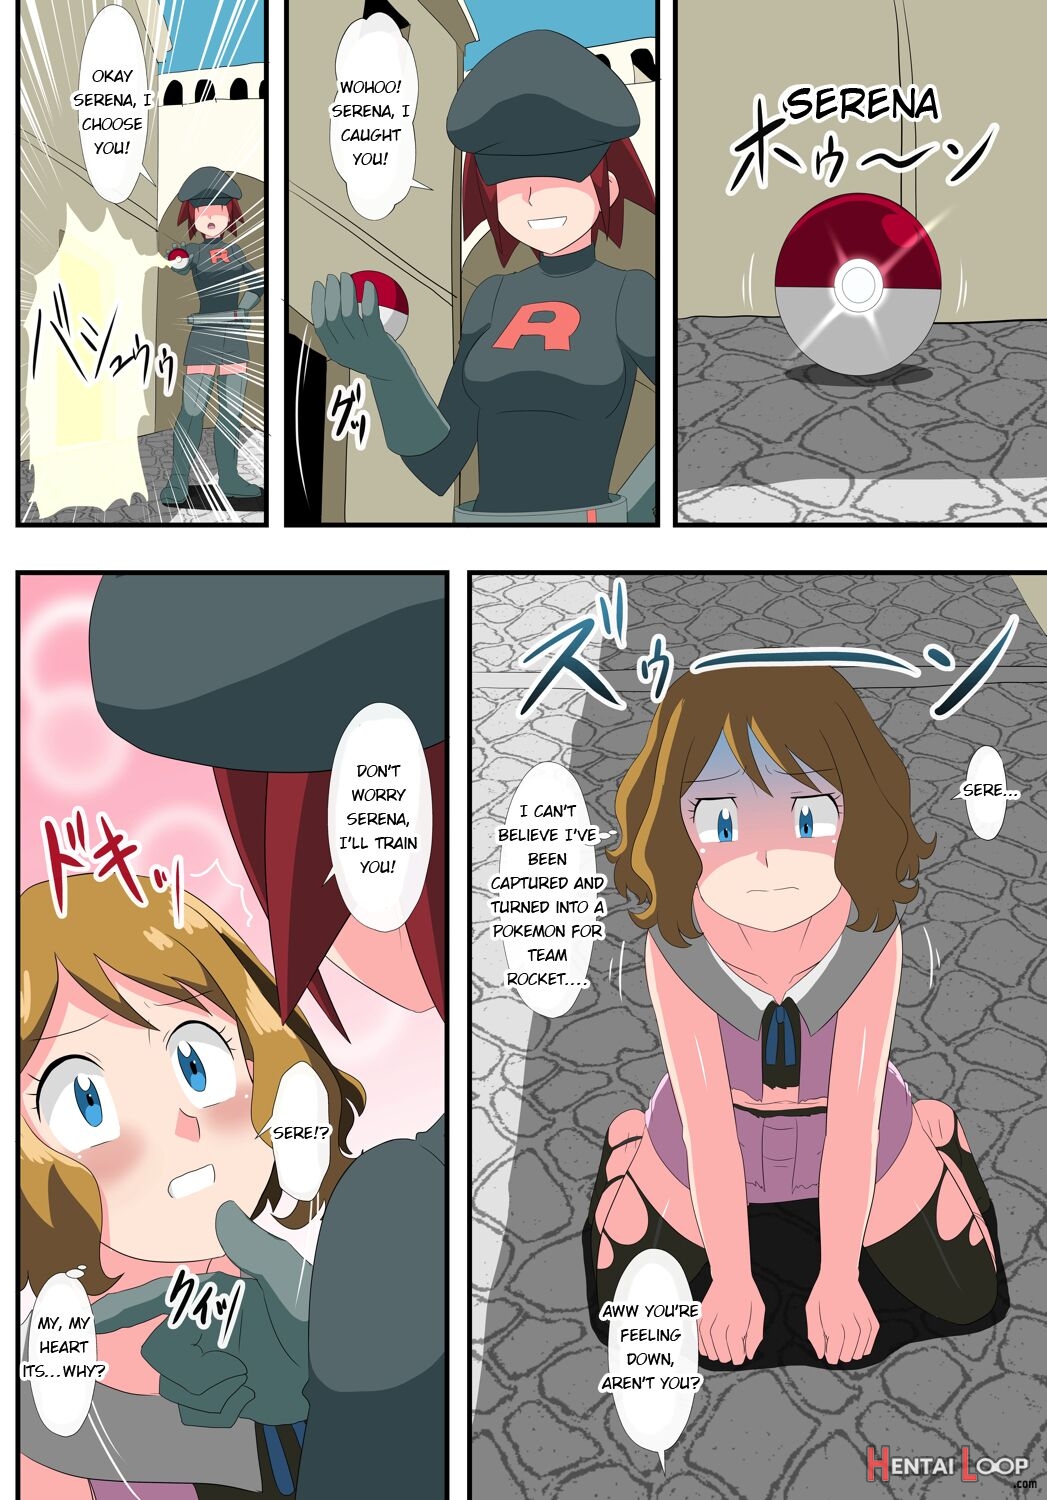 Book Of Serena: They Thought I Was A Pokemon And Captured Me! page 6